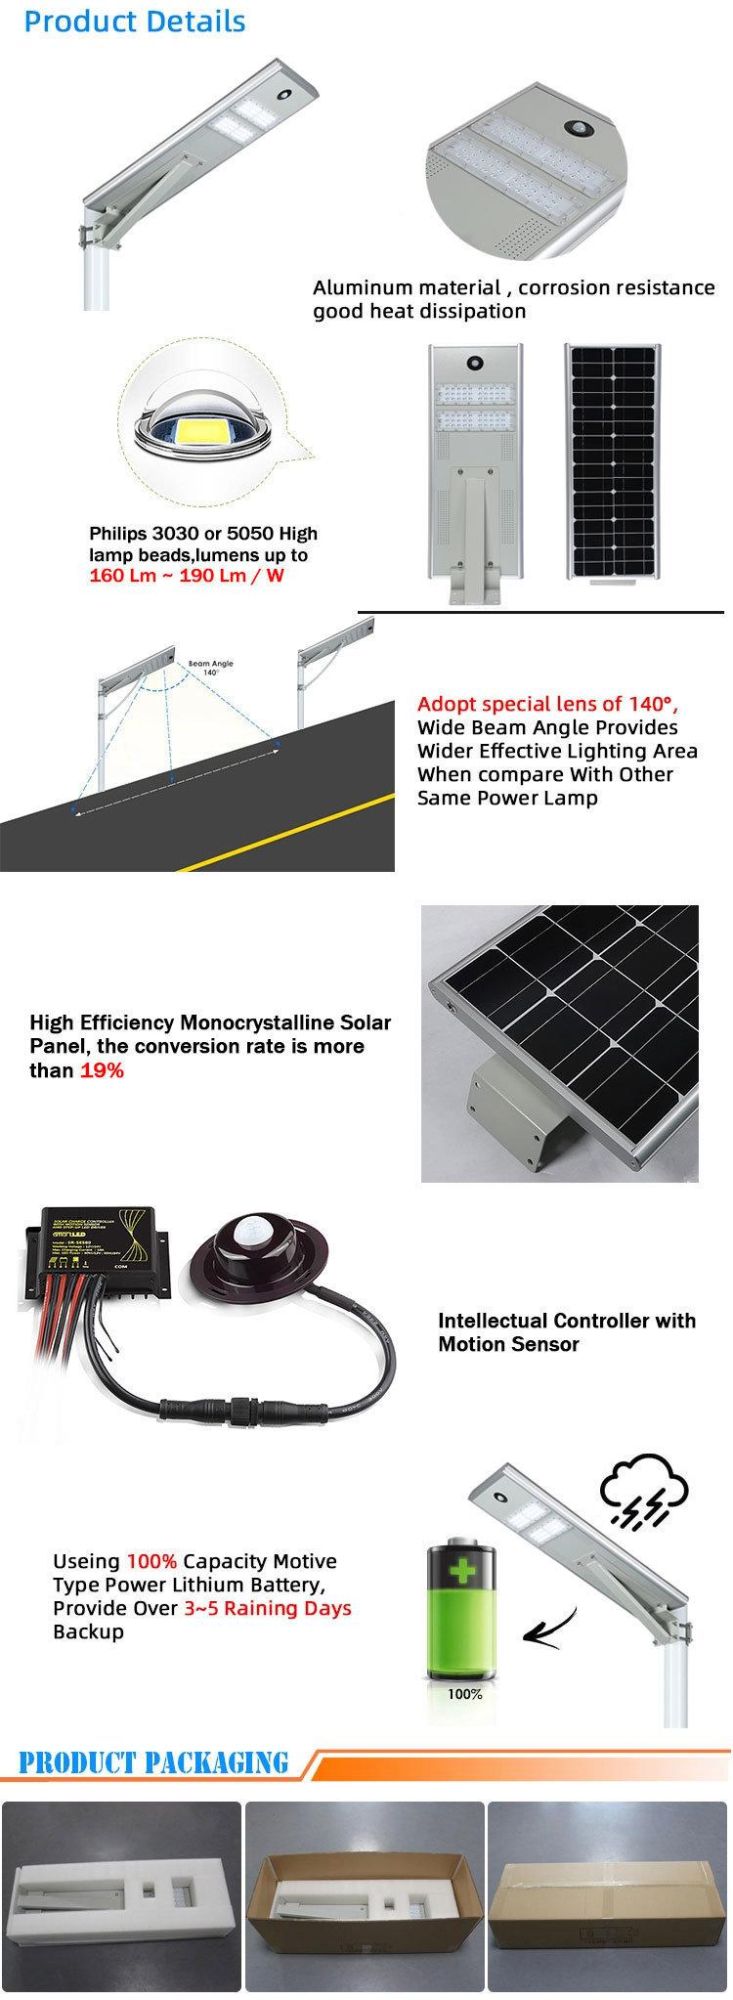 Super Brightness Outdoor Light - Operated 30W All in One Solar LED Street Light